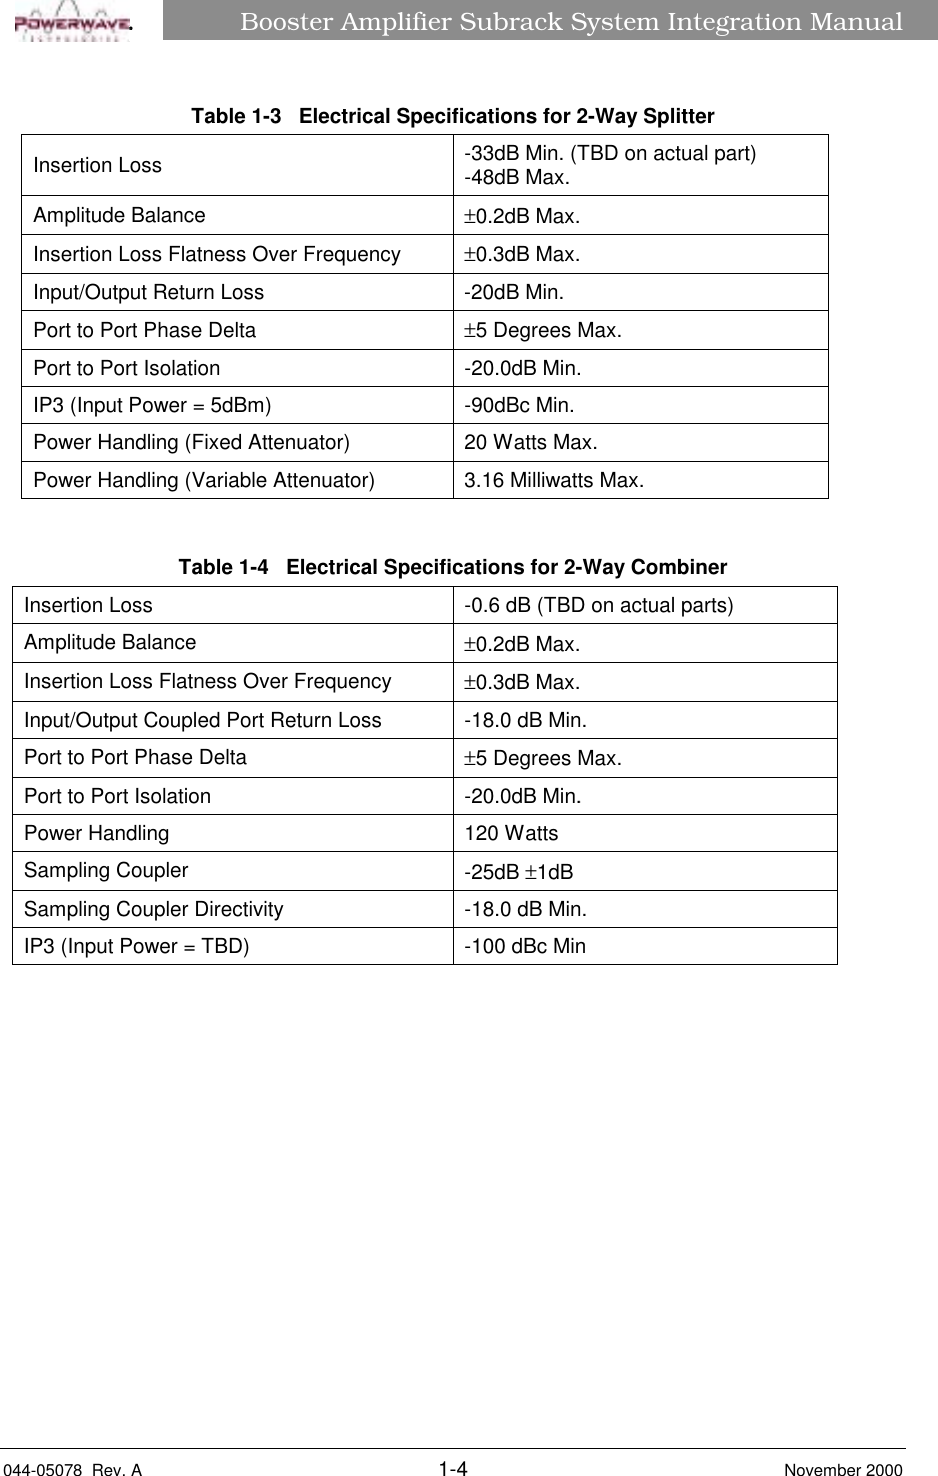 Booster Amplifier Subrack System Integration Manual044-05078  Rev. A 1-4 November 2000âTable 1-3   Electrical Specifications for 2-Way SplitterInsertion Loss -33dB Min. (TBD on actual part)-48dB Max.Amplitude Balance ±0.2dB Max.Insertion Loss Flatness Over Frequency ±0.3dB Max.Input/Output Return Loss -20dB Min.Port to Port Phase Delta ±5 Degrees Max.Port to Port Isolation -20.0dB Min.IP3 (Input Power = 5dBm) -90dBc Min.Power Handling (Fixed Attenuator) 20 Watts Max.Power Handling (Variable Attenuator) 3.16 Milliwatts Max.Table 1-4   Electrical Specifications for 2-Way CombinerInsertion Loss -0.6 dB (TBD on actual parts)Amplitude Balance ±0.2dB Max.Insertion Loss Flatness Over Frequency ±0.3dB Max.Input/Output Coupled Port Return Loss -18.0 dB Min.Port to Port Phase Delta ±5 Degrees Max.Port to Port Isolation -20.0dB Min..Power Handling 120 WattsSampling Coupler -25dB ±1dBSampling Coupler Directivity -18.0 dB Min.IP3 (Input Power = TBD) -100 dBc Min